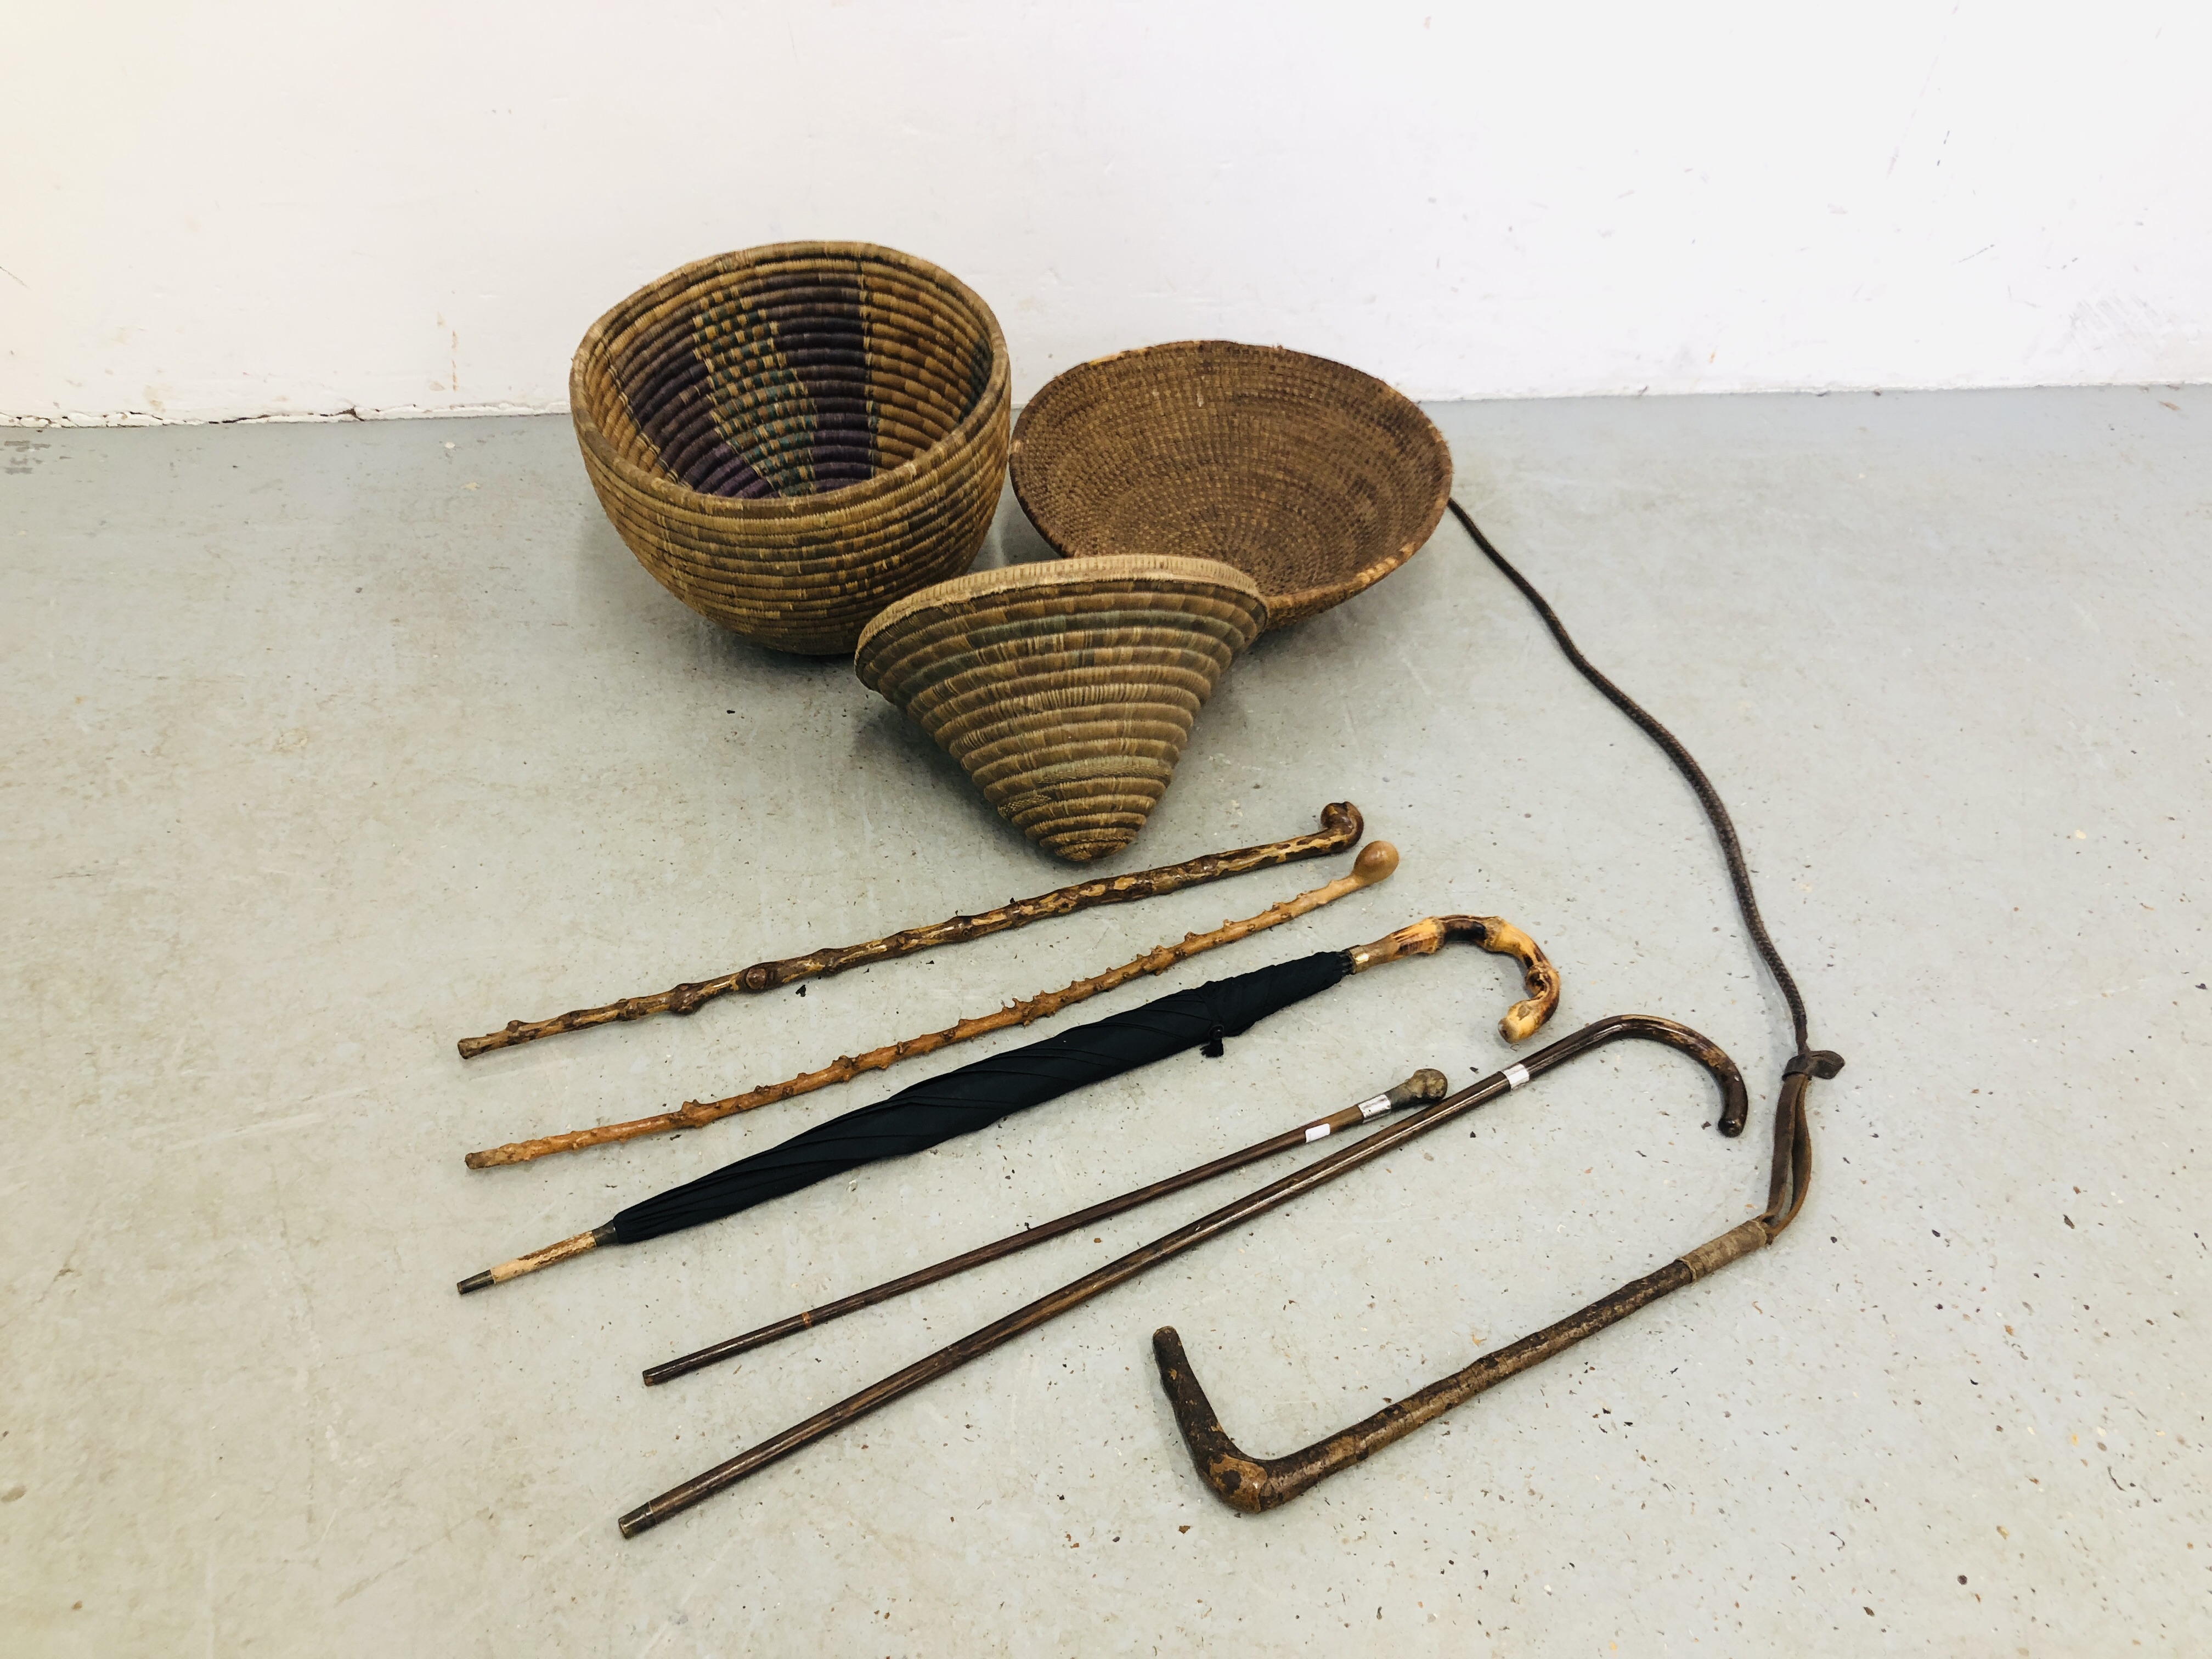 VINTAGE WICKER / SEAGRASS SNAKES BASKET AND ONE OTHER ALONG WITH 4 VINTAGE WALKING CANES,